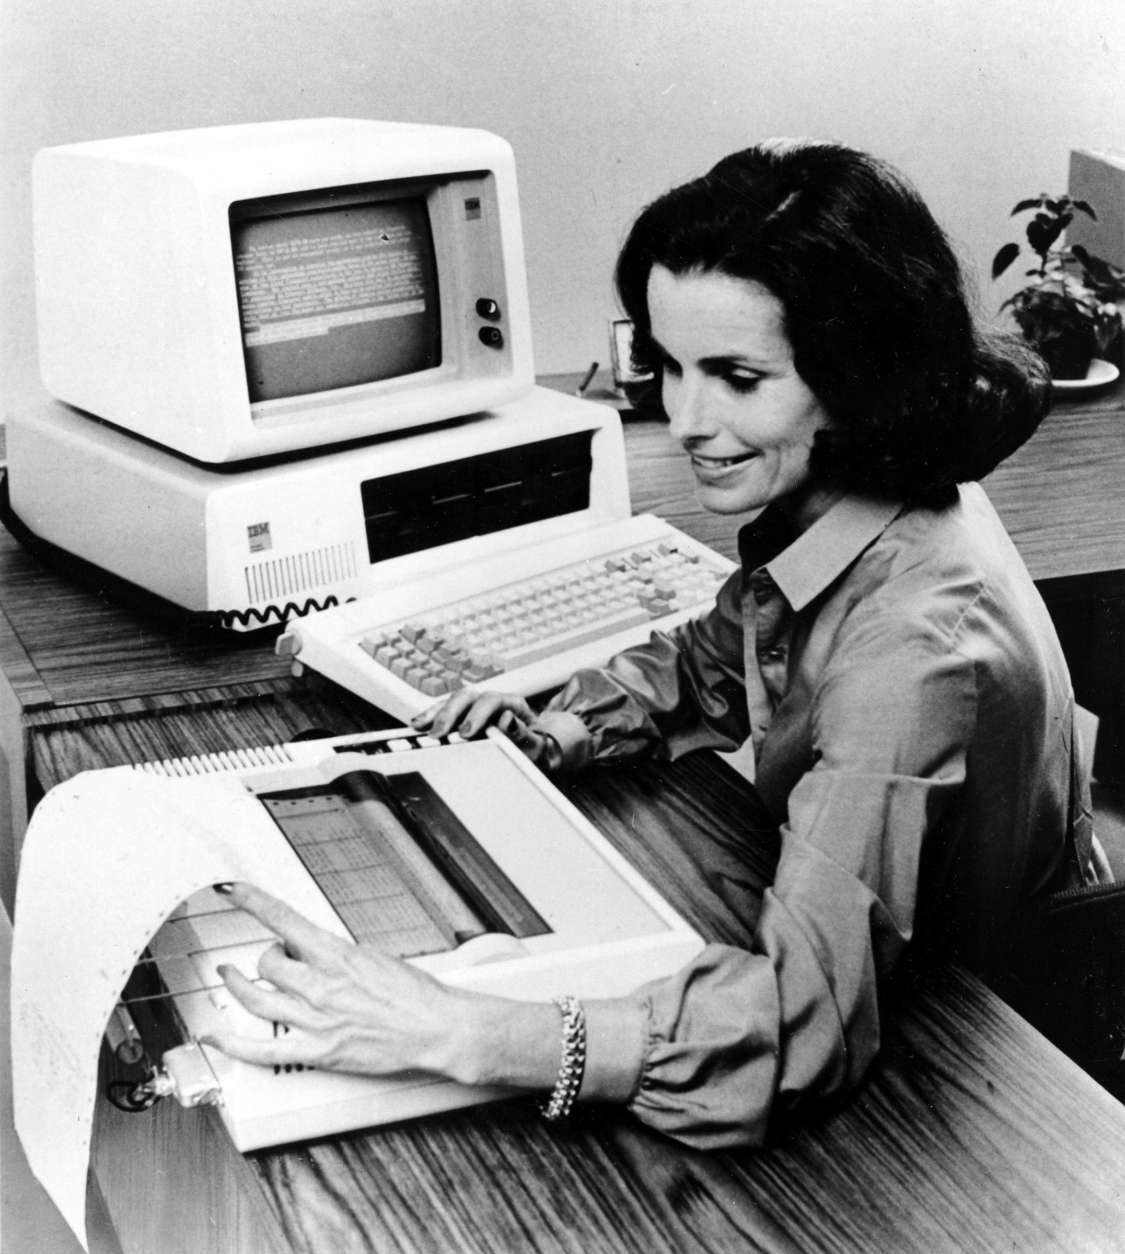 The new IBM Personal Computer system for home and school use is shown in Aug. 1981.  The expandable system includes a monitor screen, printer and disk drives.  (AP Photo)